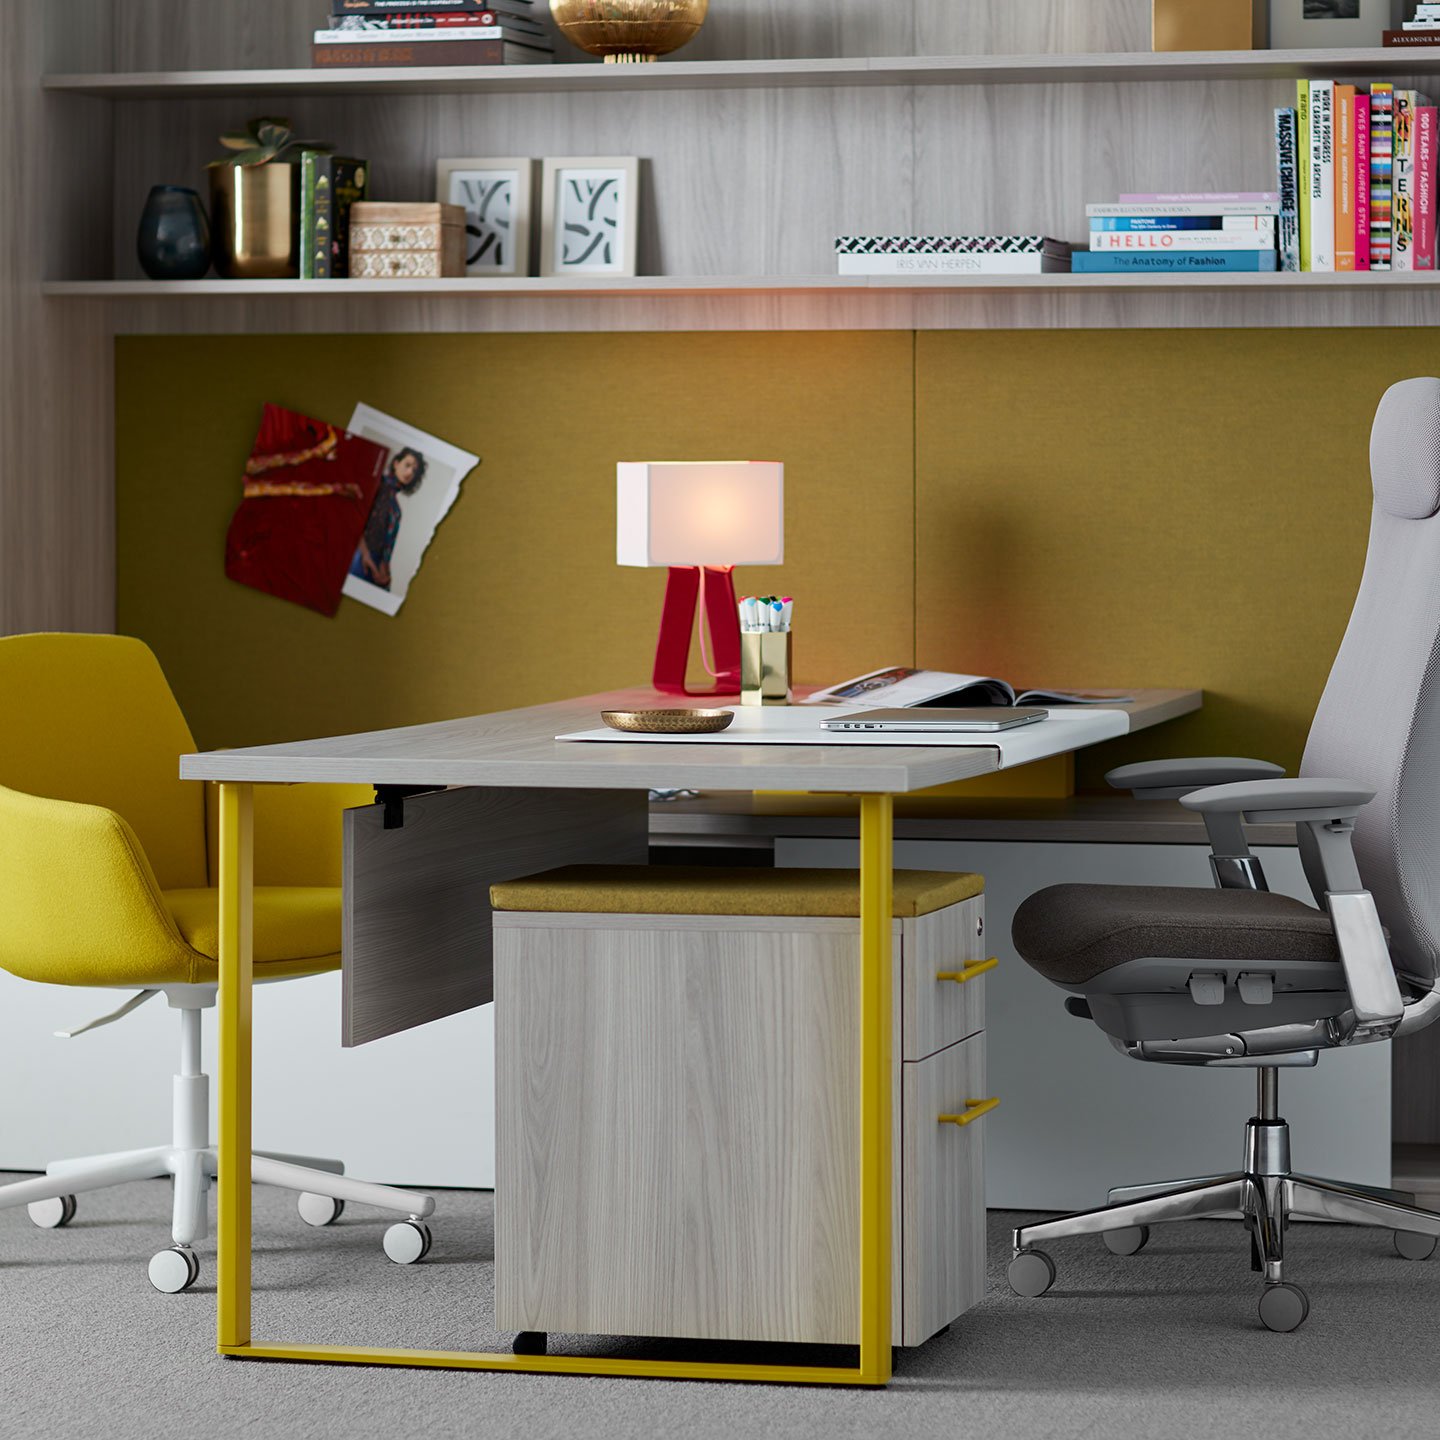 Haworth Masters Series Workspace with laminate desk in private office space with grey shelving above desk with grey and yellow chair